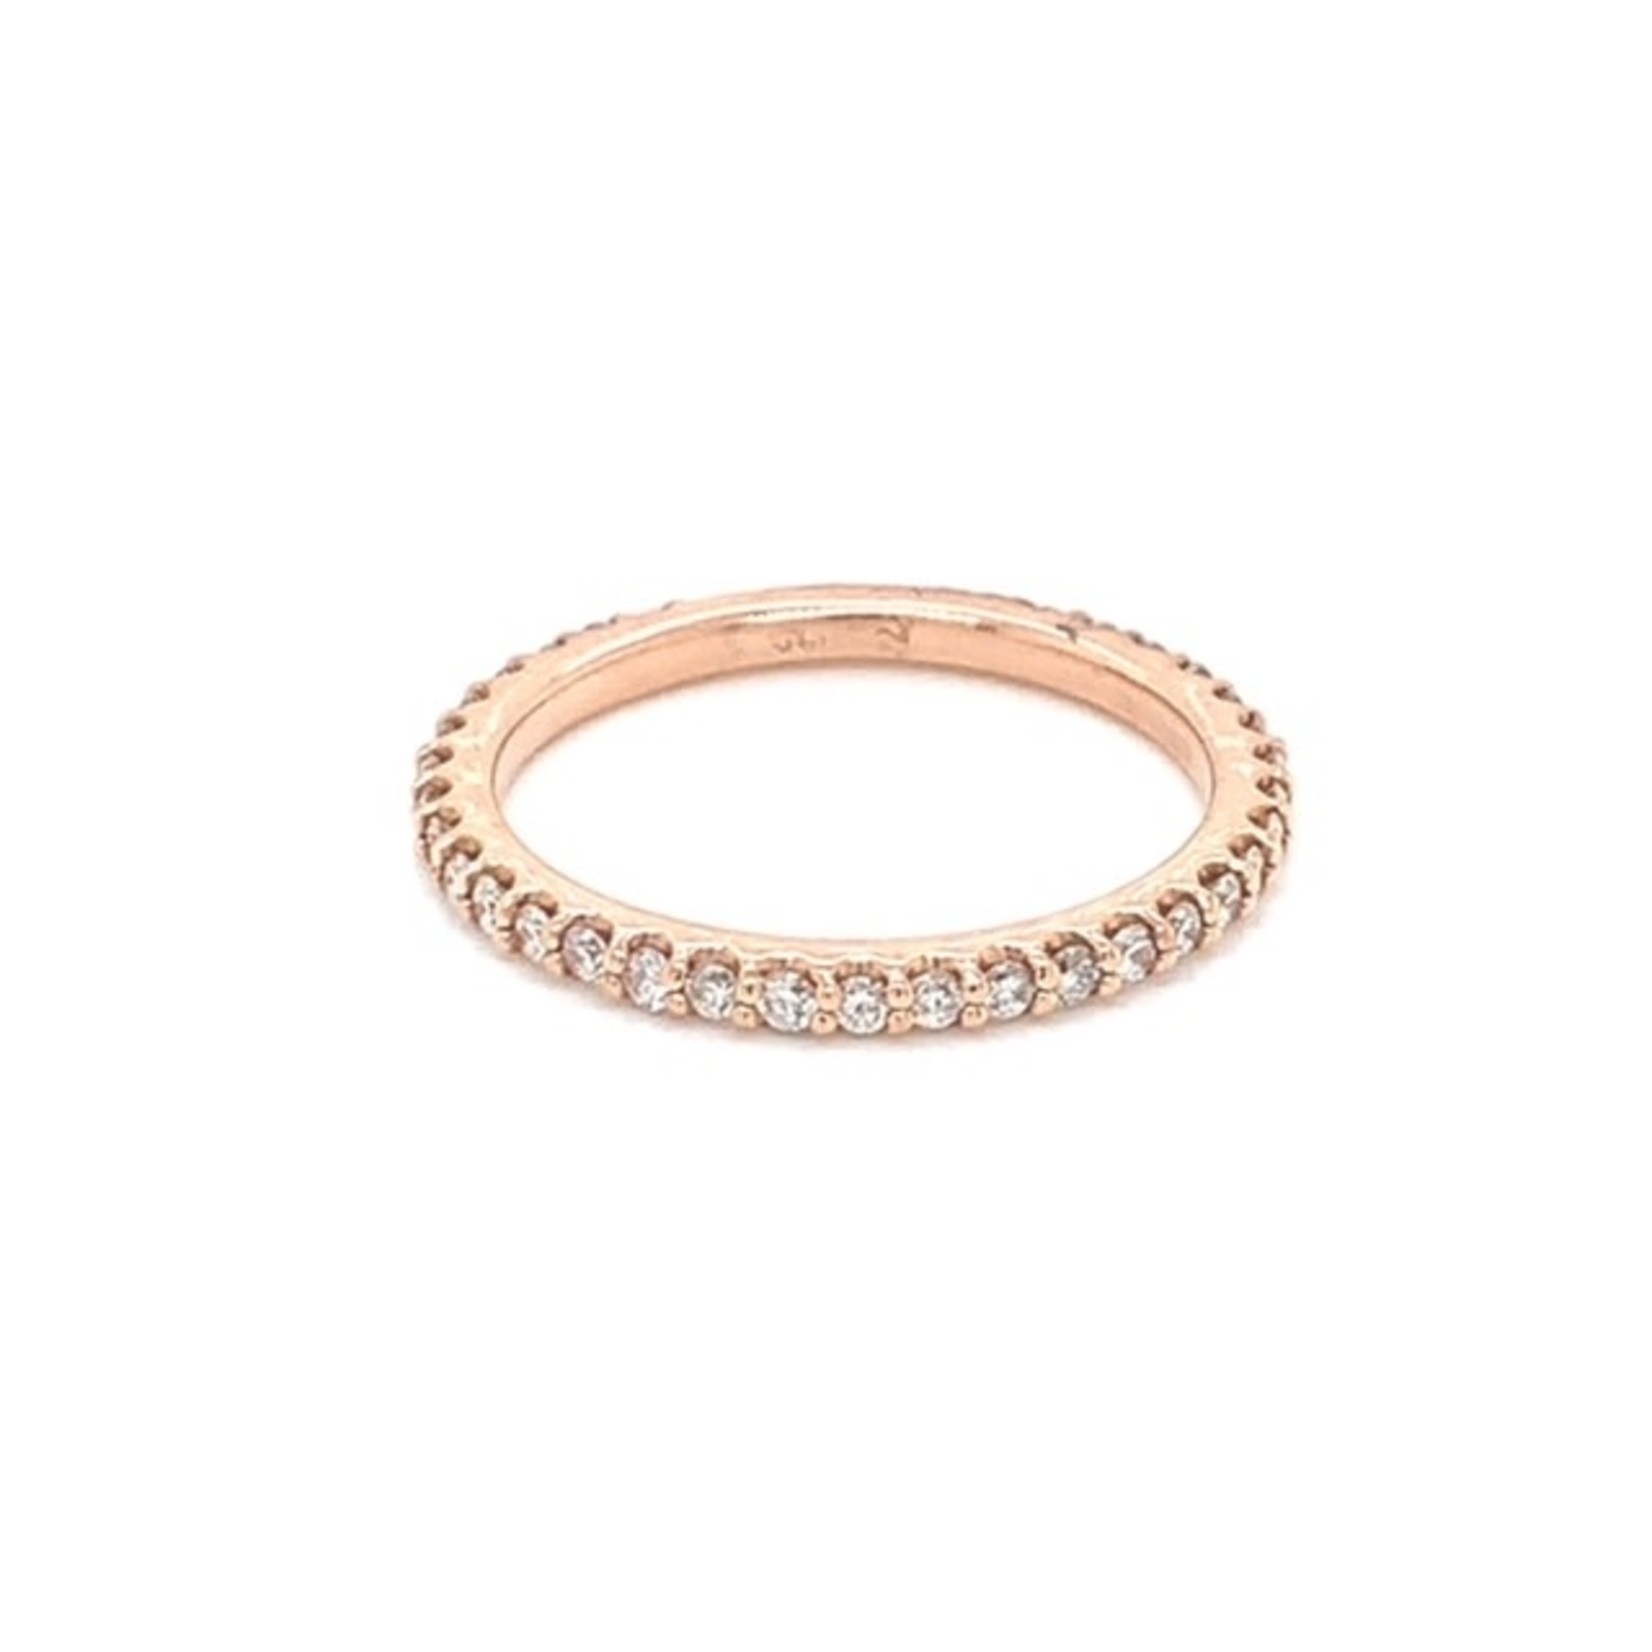 On The Edge Stand By Me Diamond Band - Rose Gold